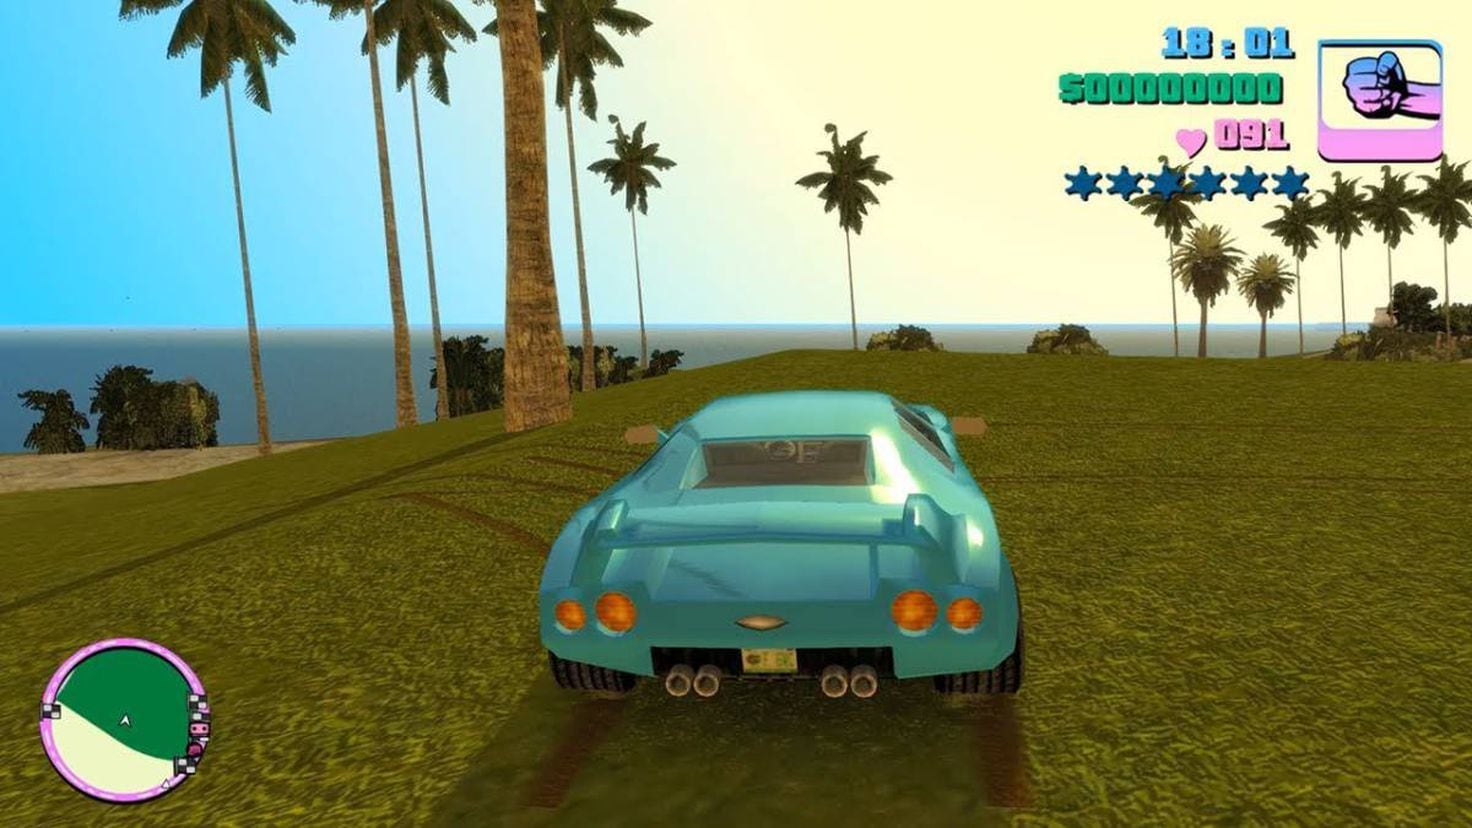 Trucos Grand Theft Auto: Vice City Stories - PS2 - Claves, Guías